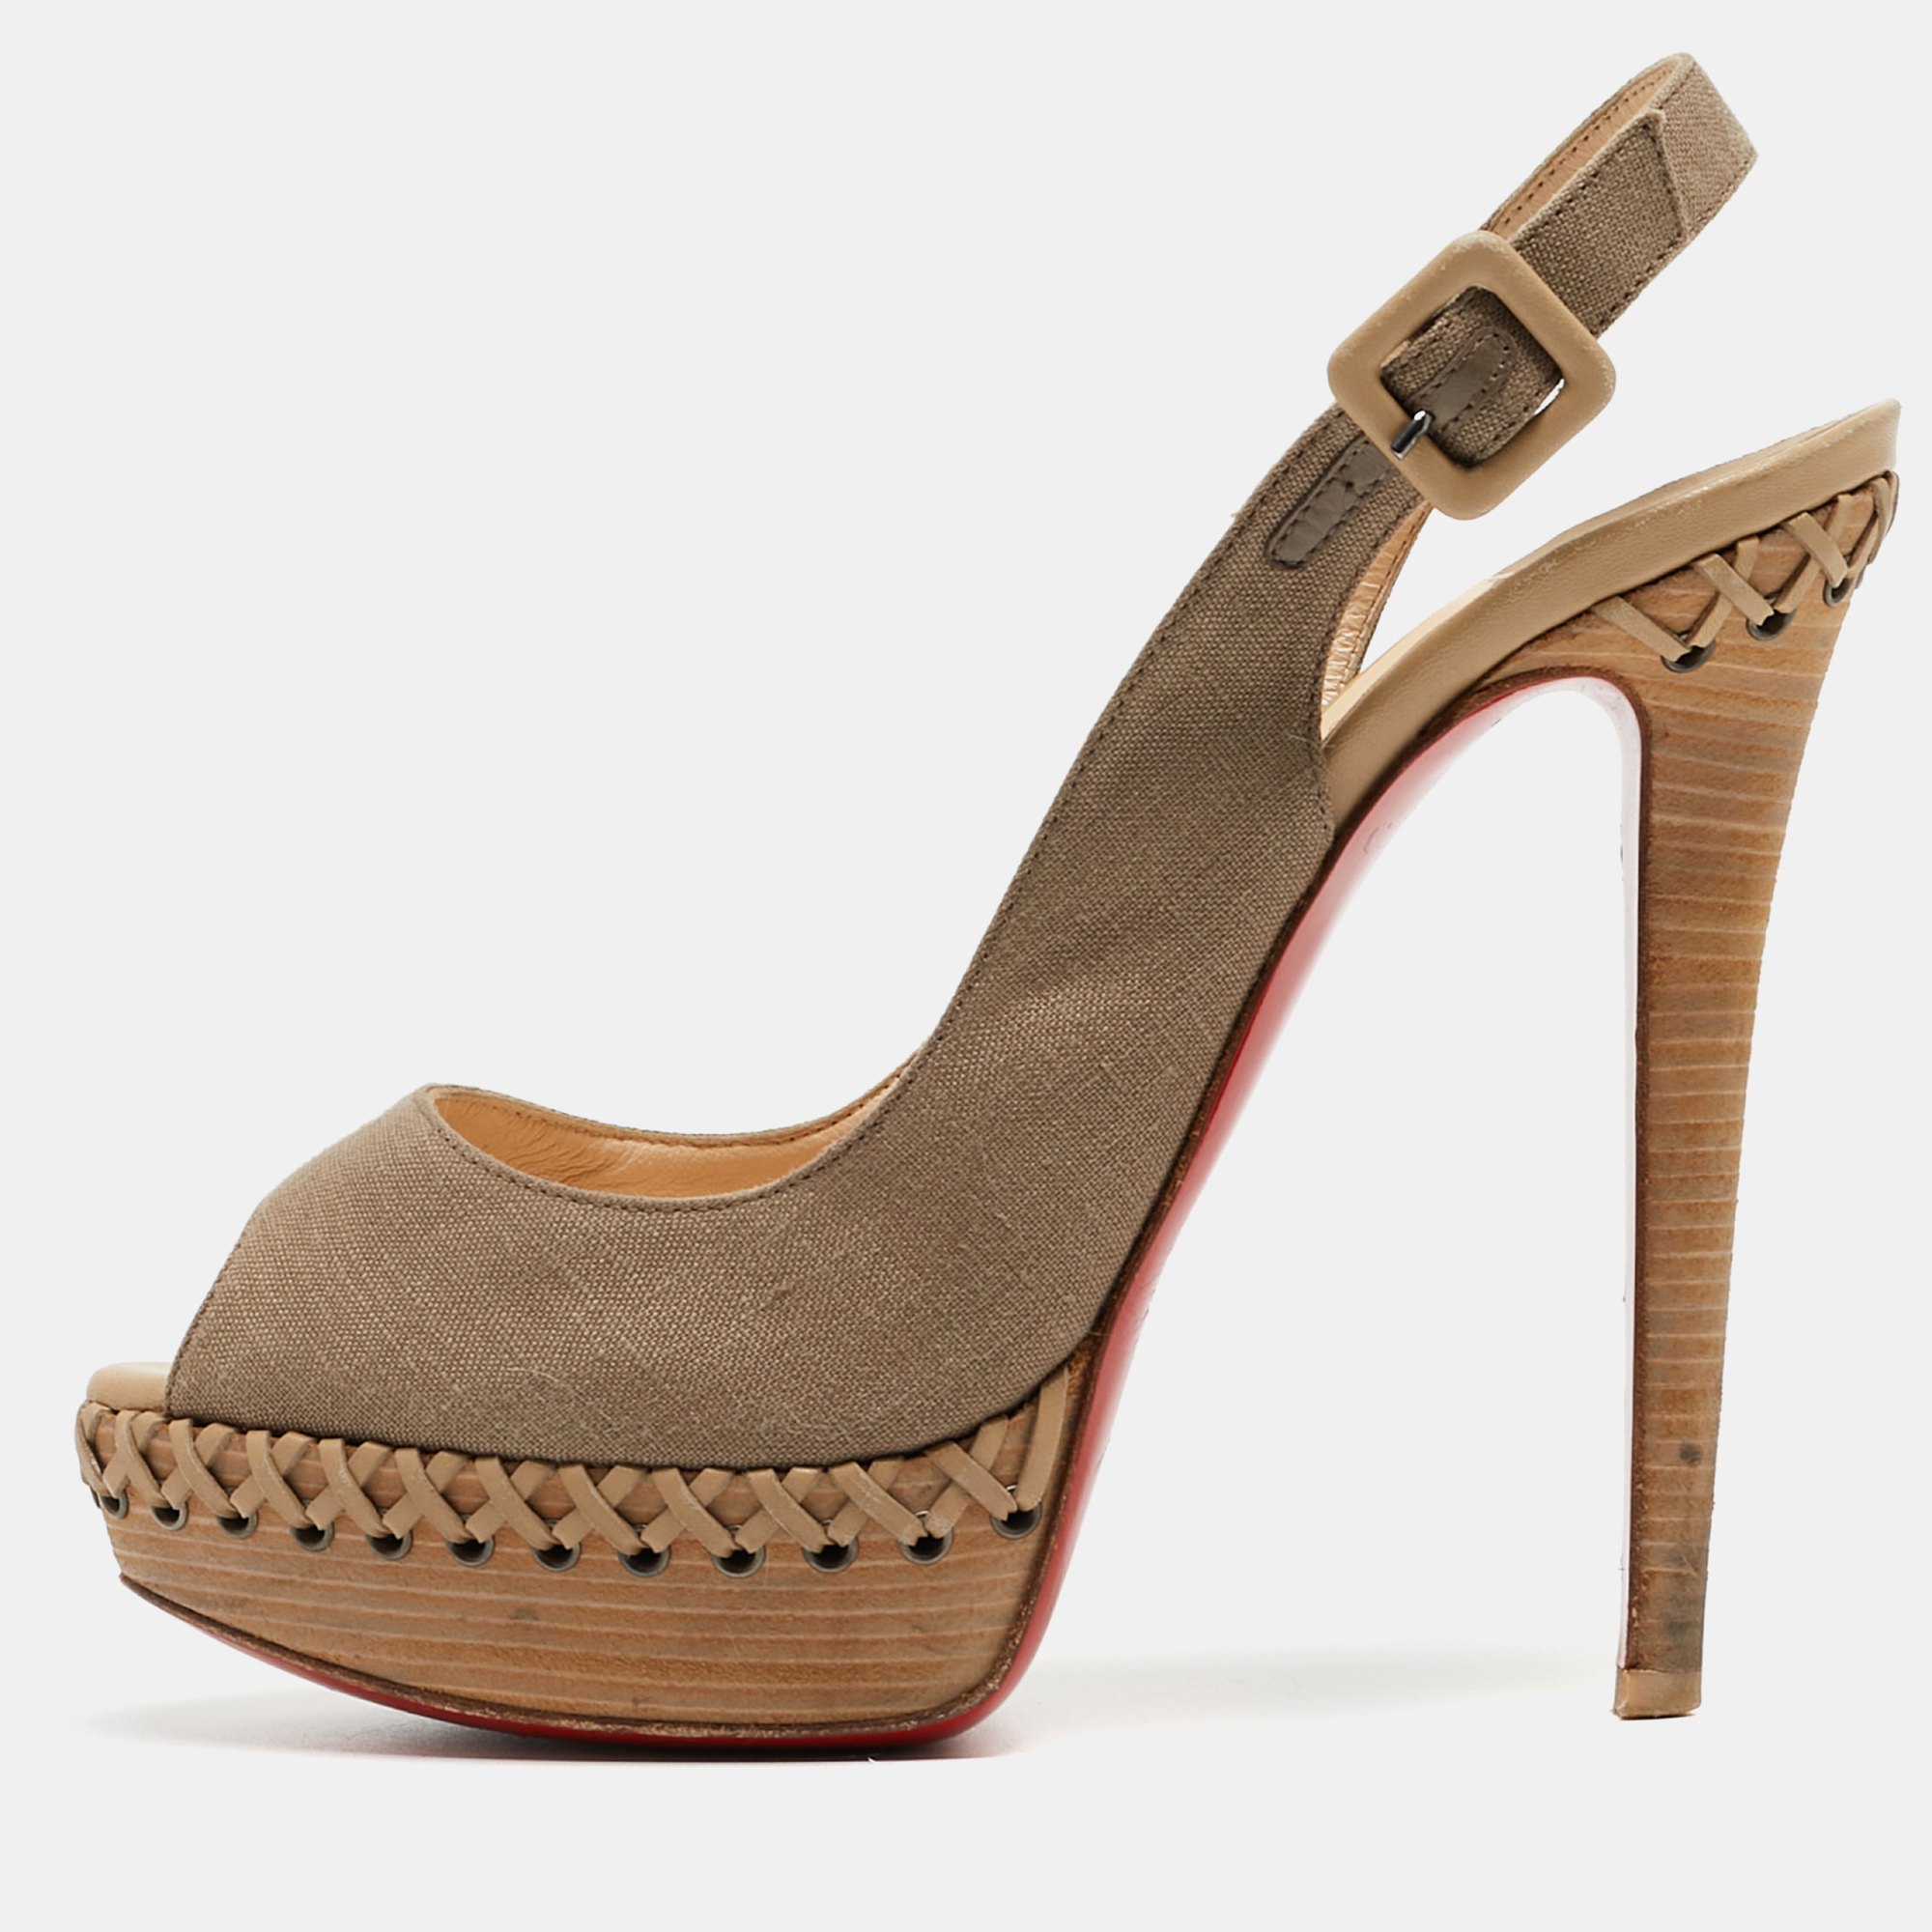 Christian louboutin brown canvas indiana slingback sandals size 38